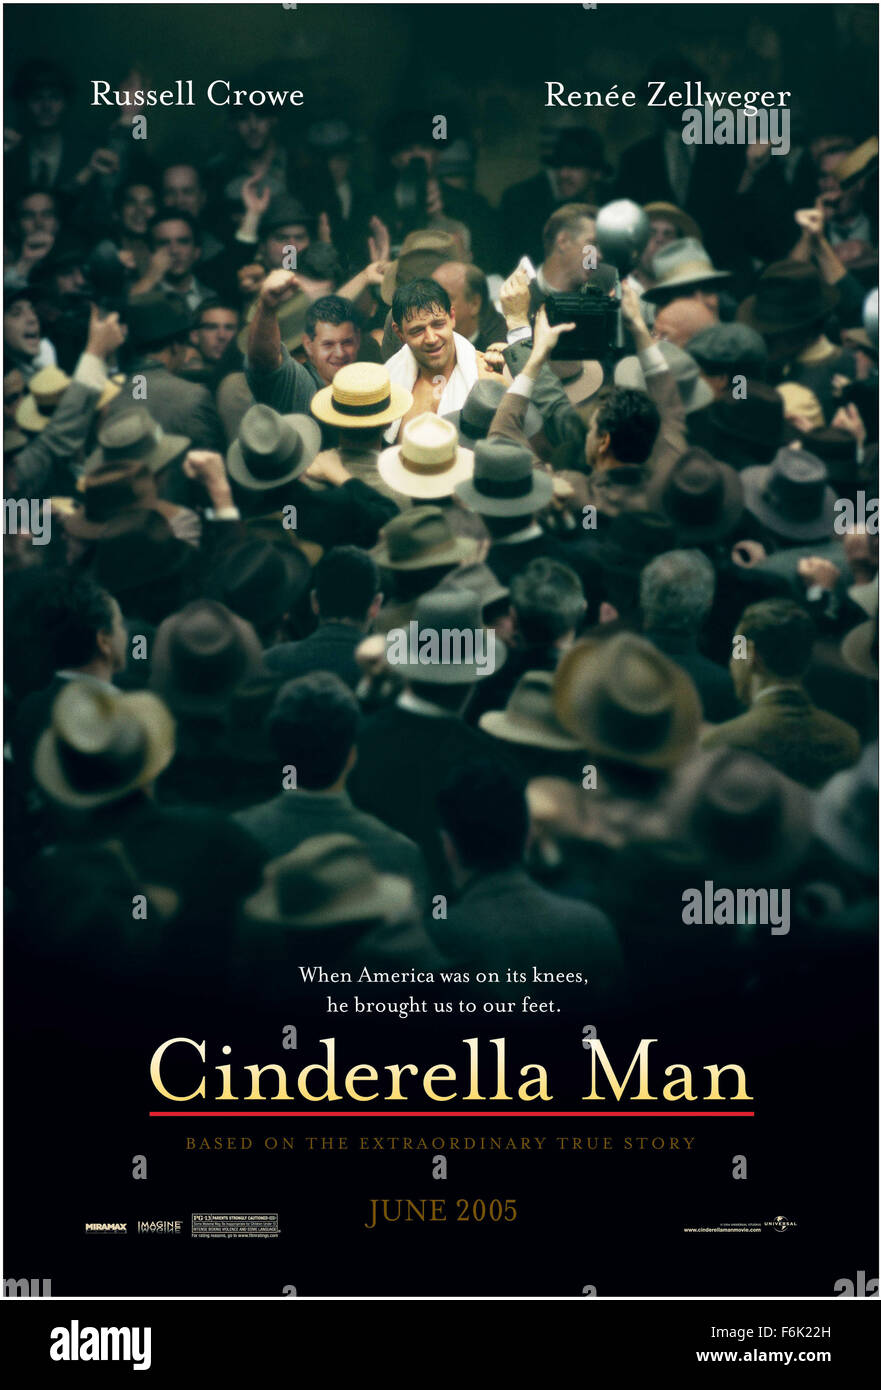 RELEASE DATE: June 3, 2005. MOVIE TITLE: Cinderella Man. STUDIO: Universal  Pictures. PLOT: The story of James Braddock, a supposedly washed up boxer  who came back to become a champion and an